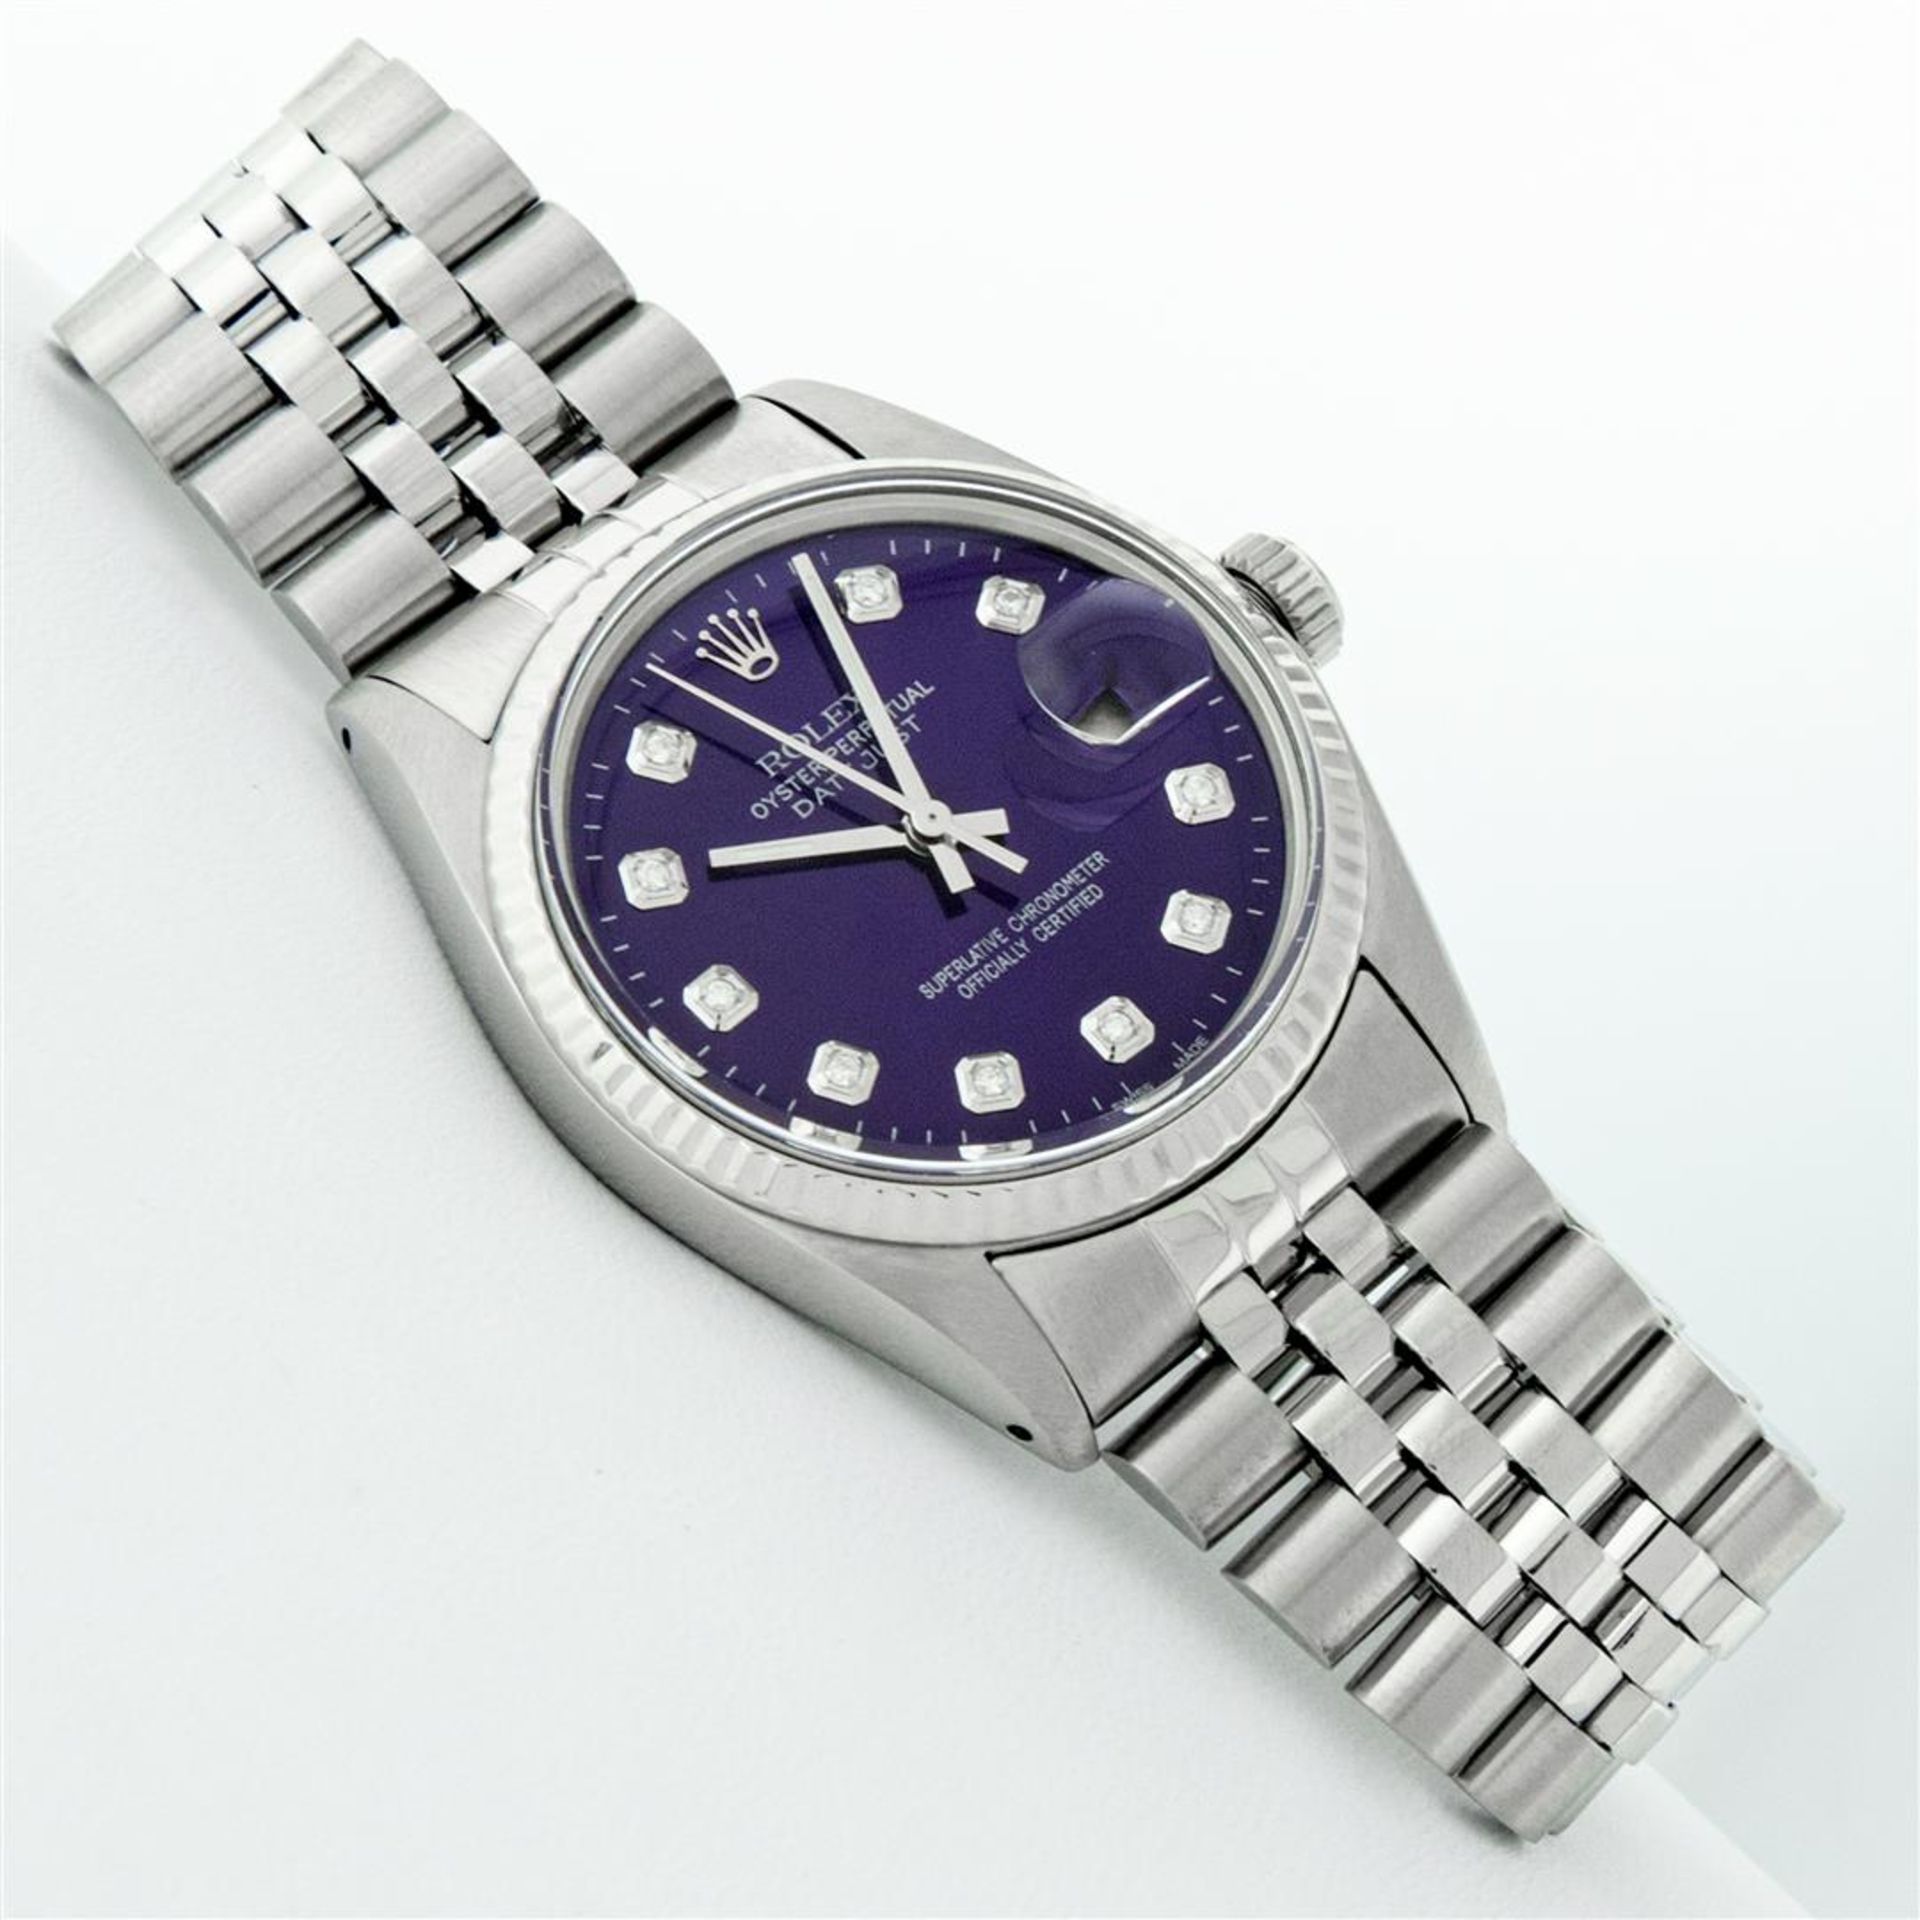 Rolex Mens Stainless Steel Purple Diamond 36MM Datejust Oyster Perpetual Wristwa - Image 3 of 9